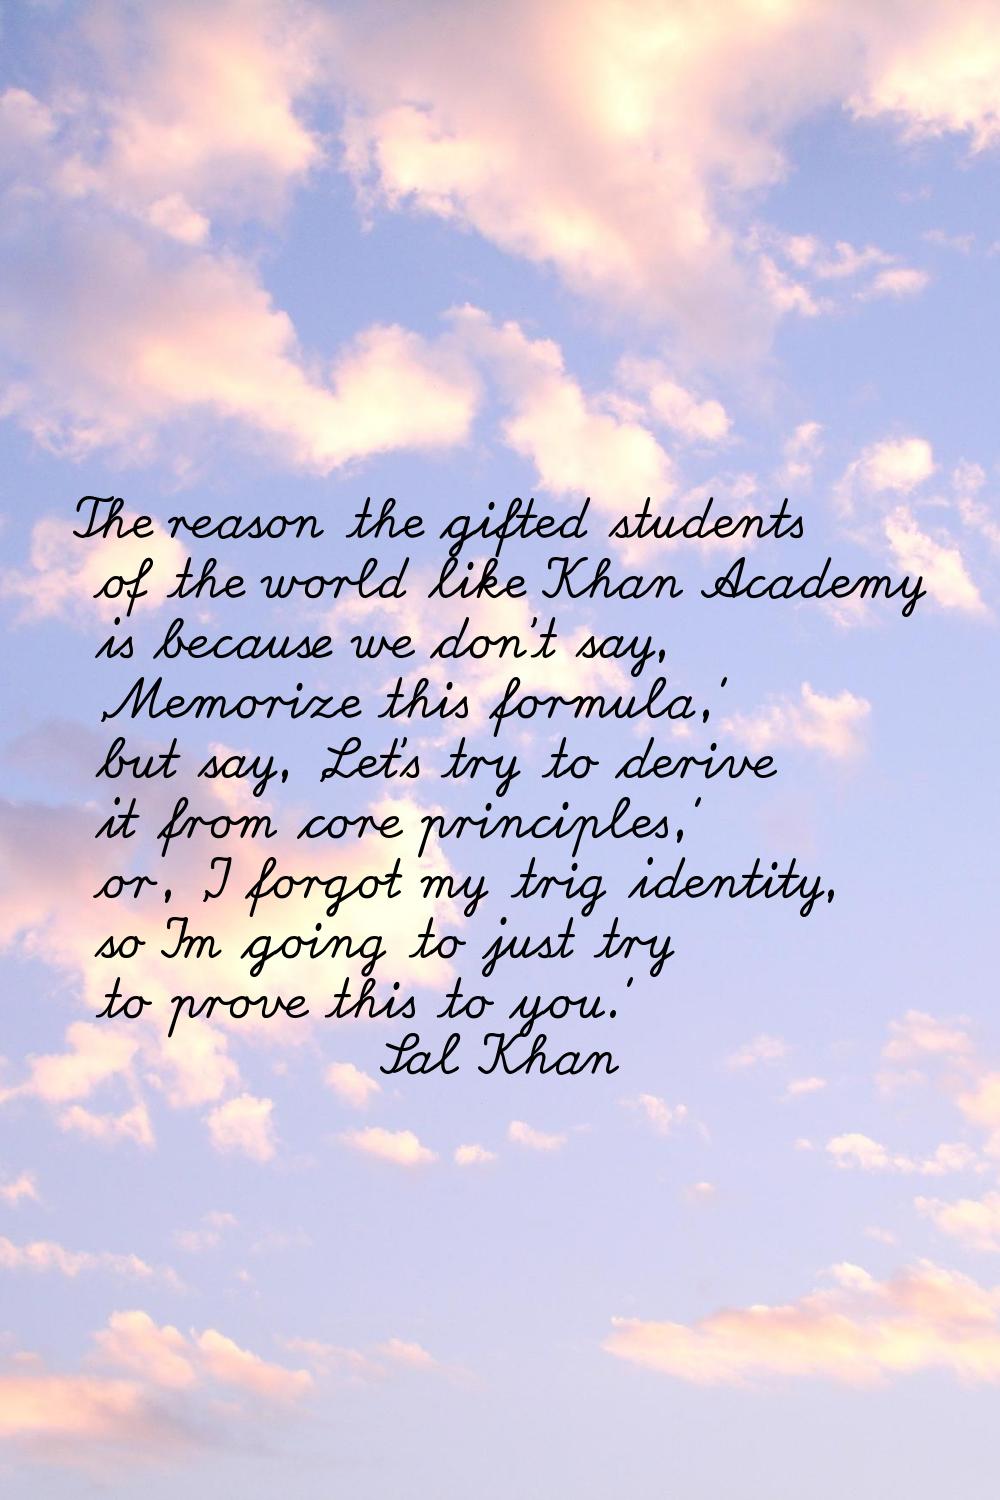 The reason the gifted students of the world like Khan Academy is because we don't say, 'Memorize th